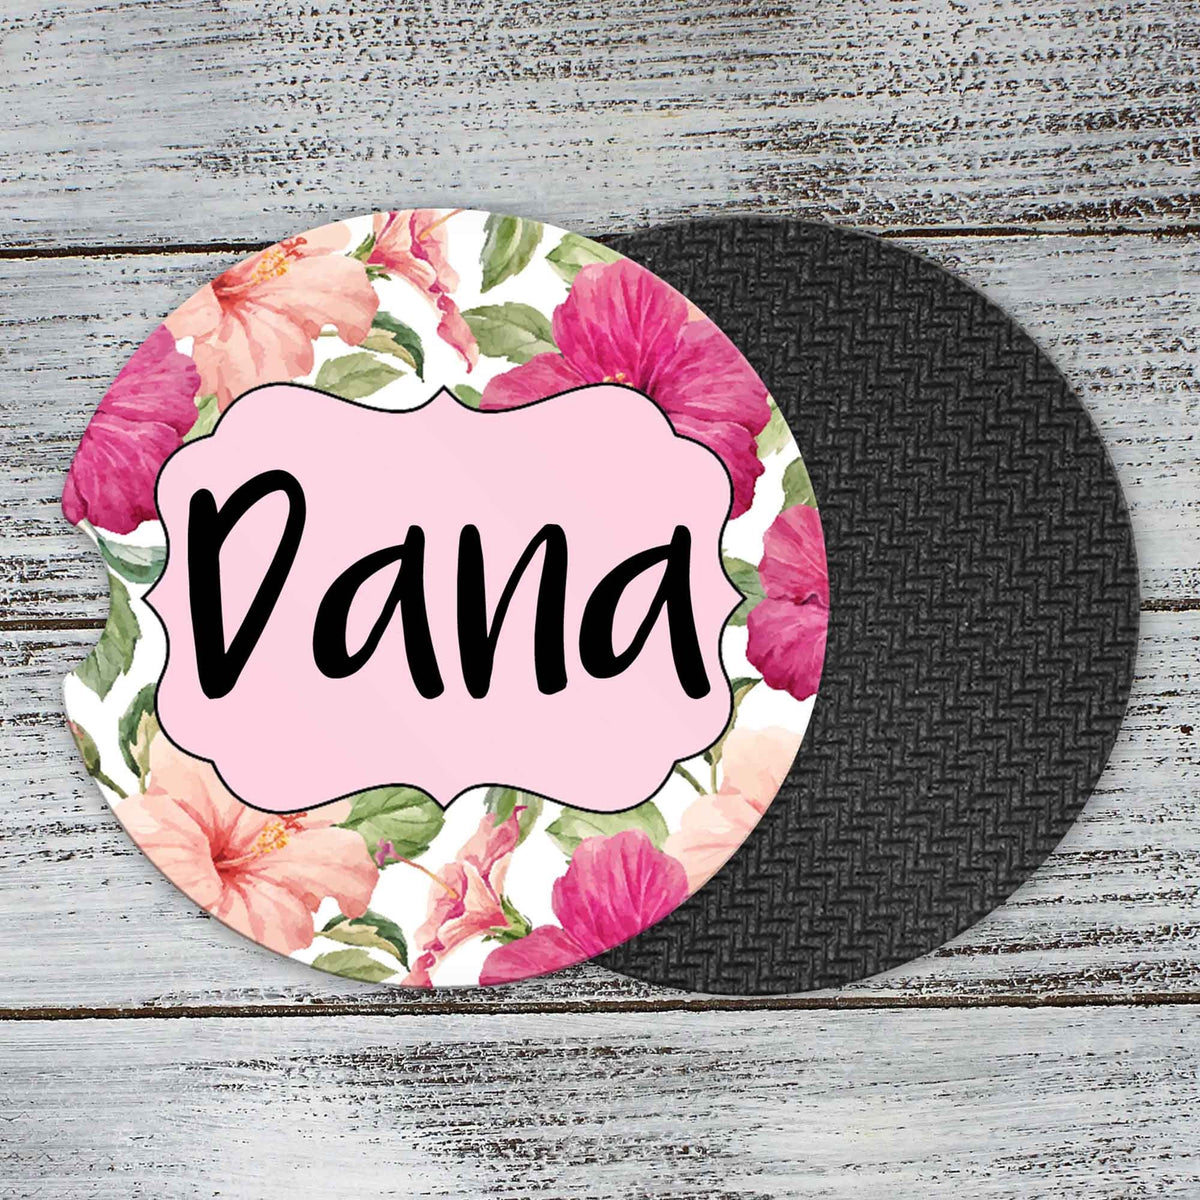 Personalized Car Coasters | Custom Car Accessories | Floral Hibiscus | Set of 2